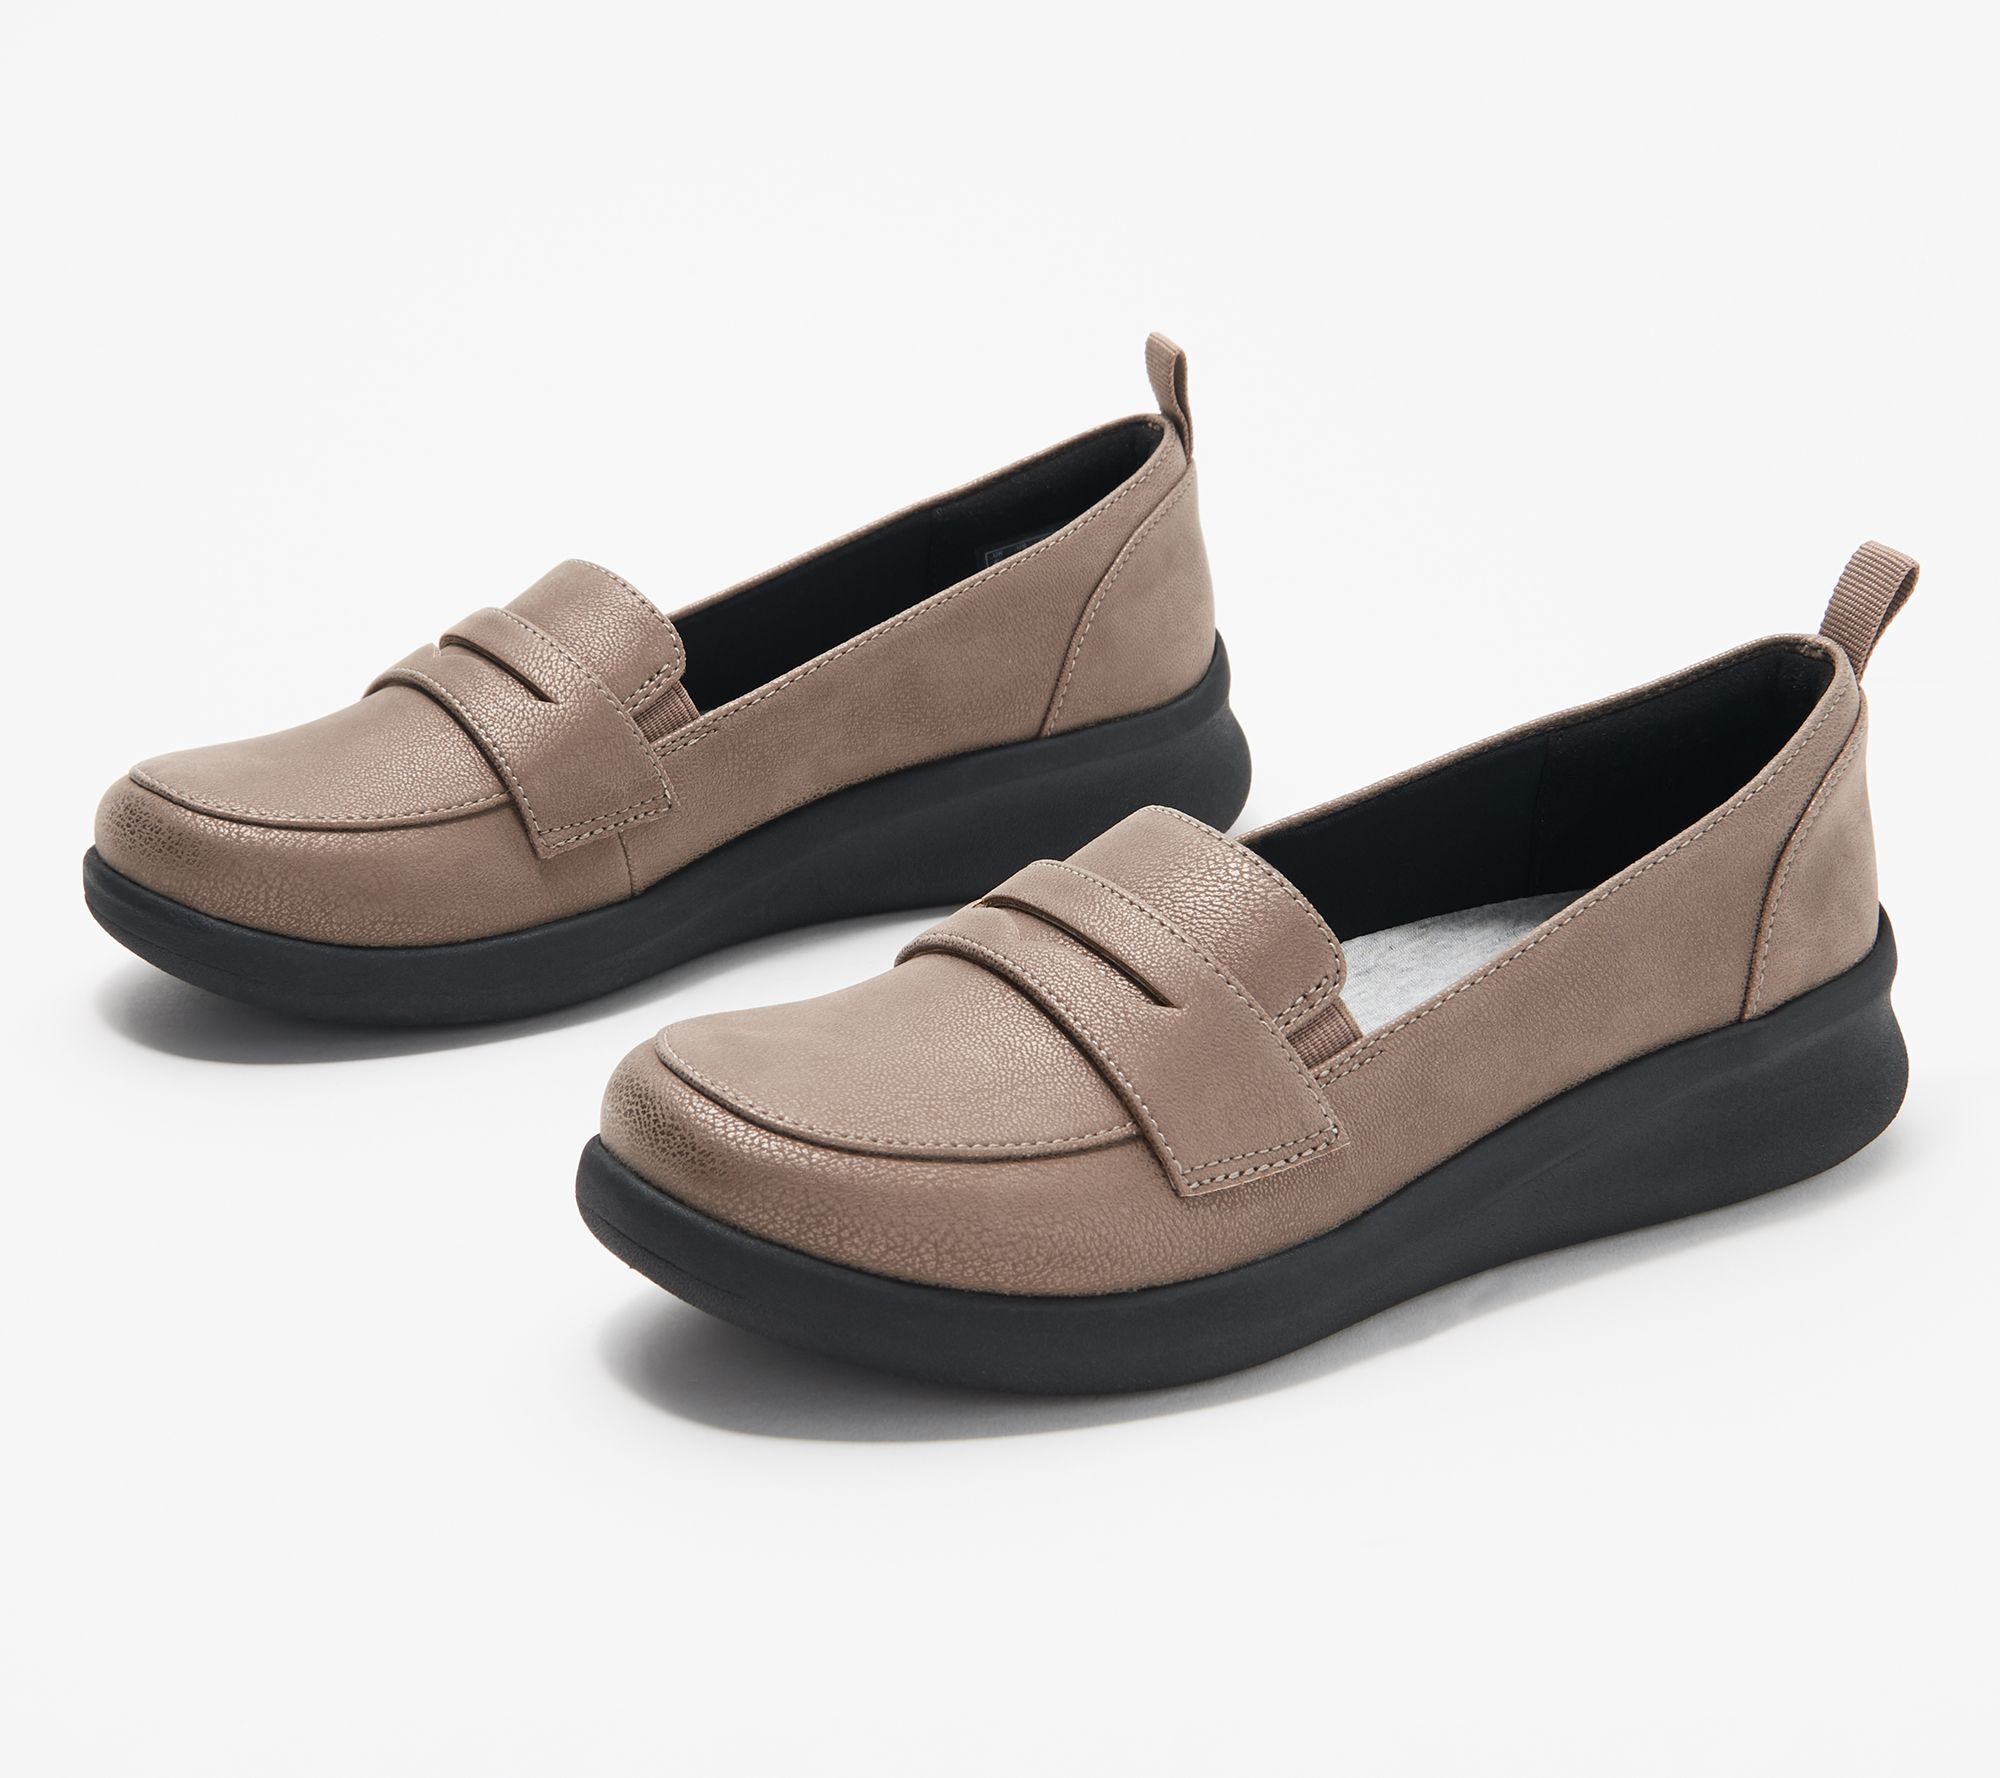 qvc clarks cloudsteppers